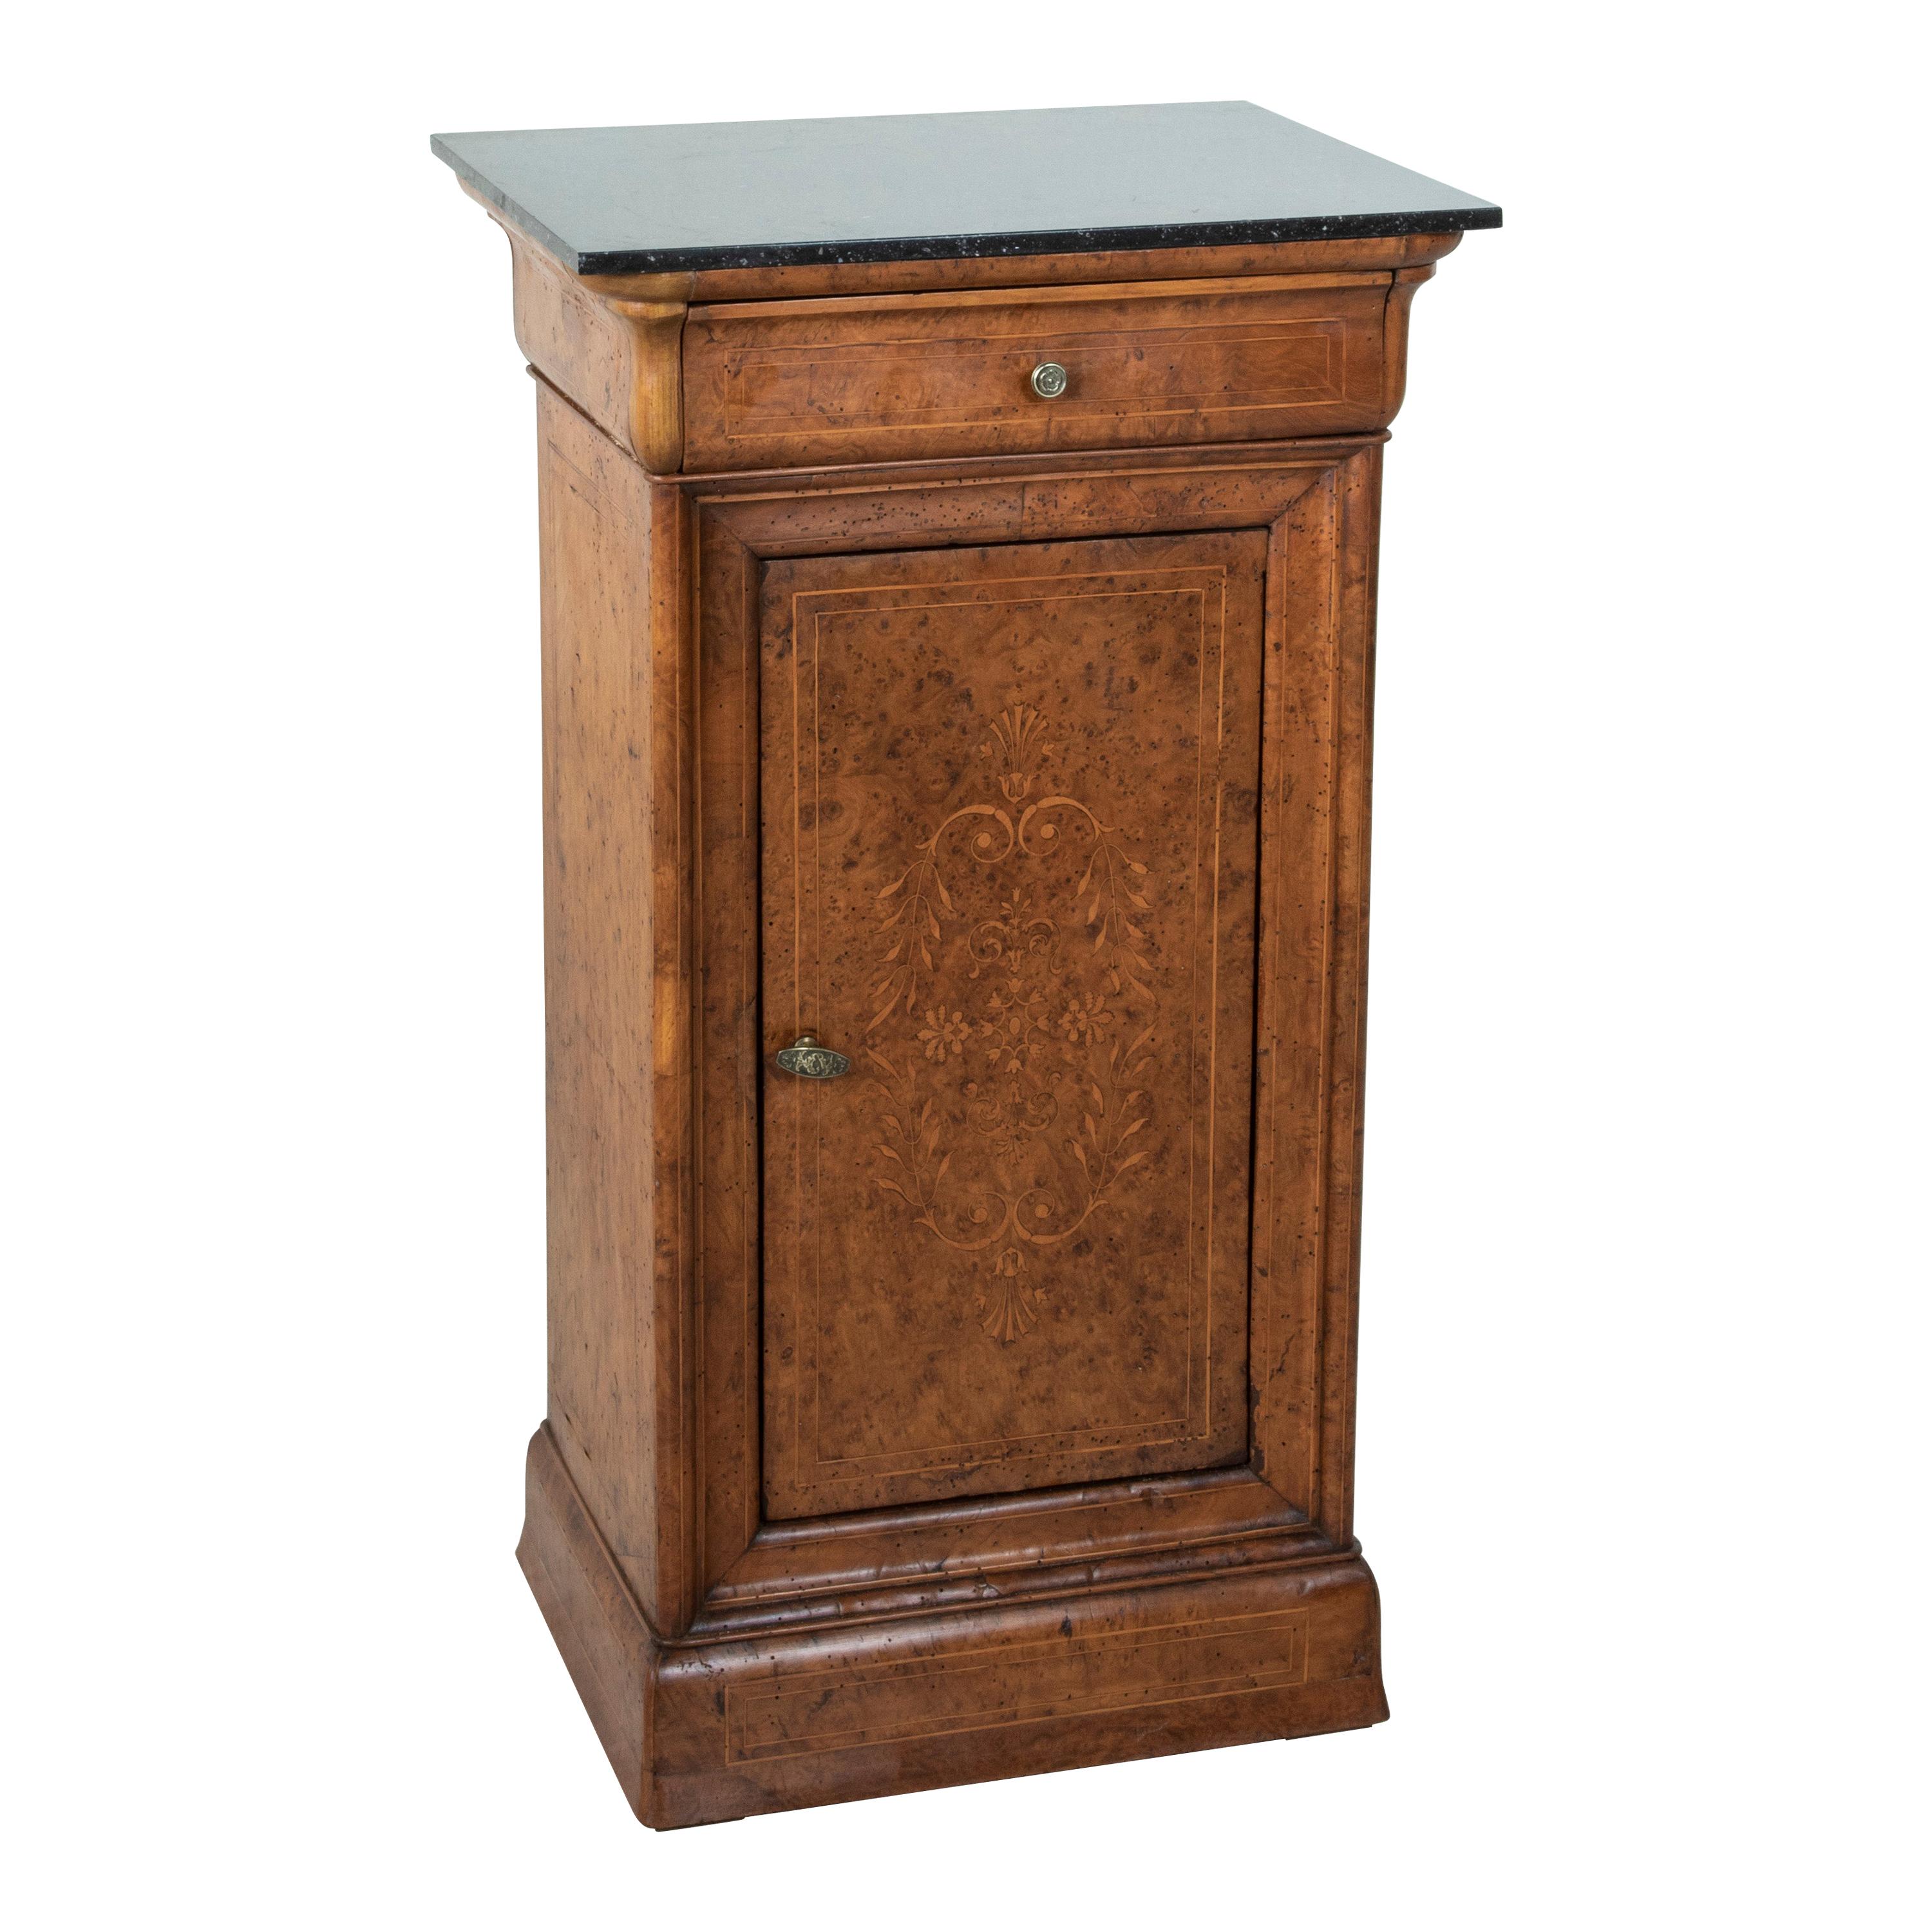 Early 19th Century French Charles X Period Birdseye Maple Nightstand with Marble